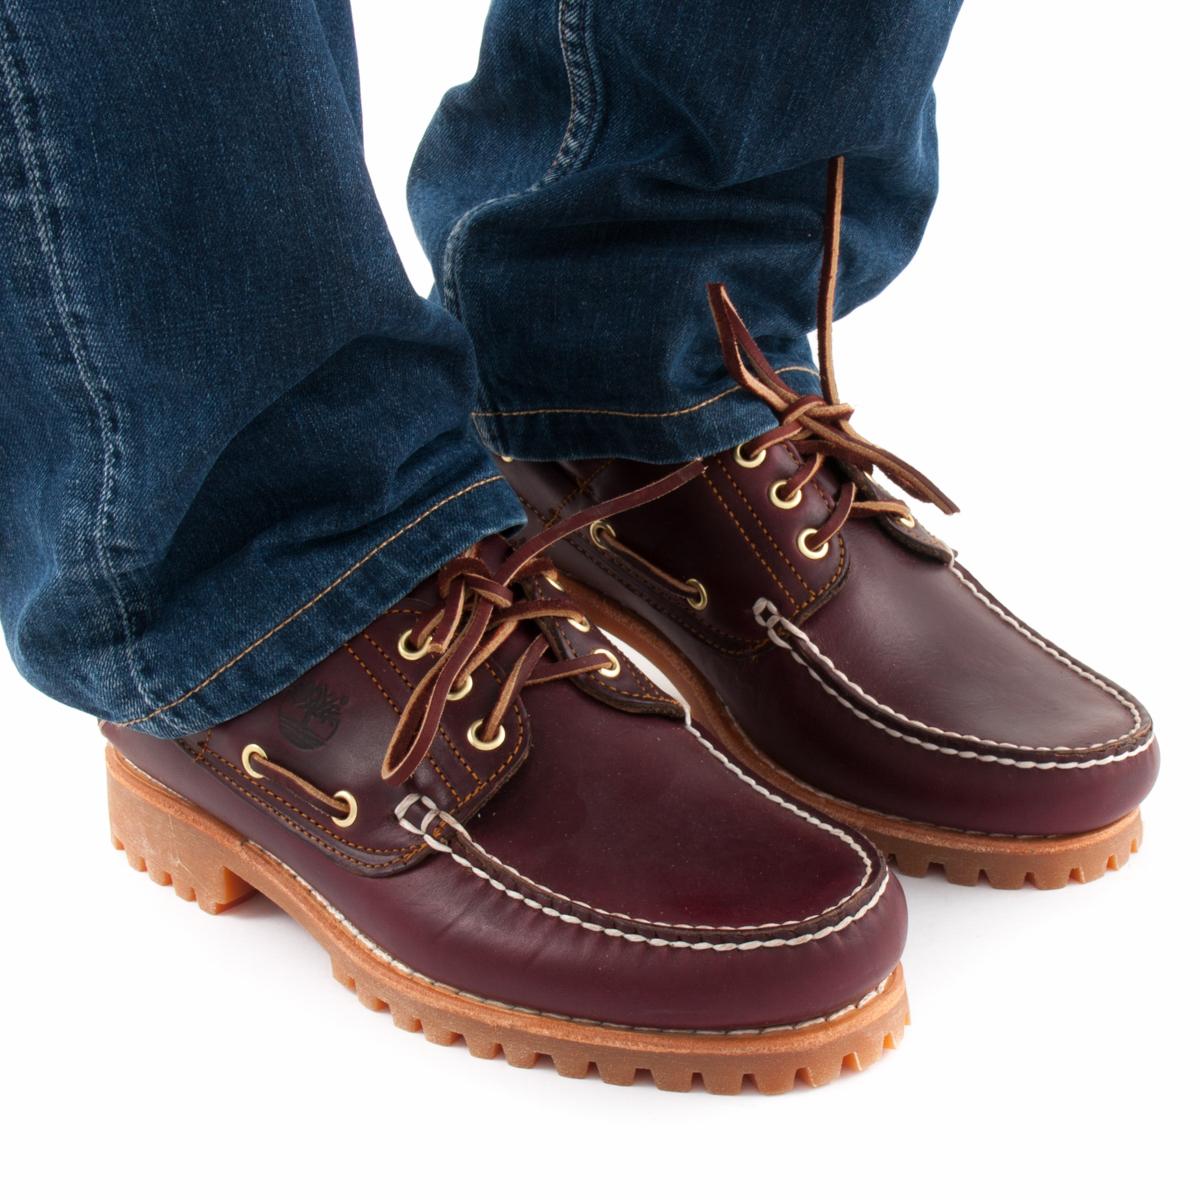 siren National census fluctuate Boat Shoes TIMBERLAND 50009 3-Eye Classic Lug Burgundy